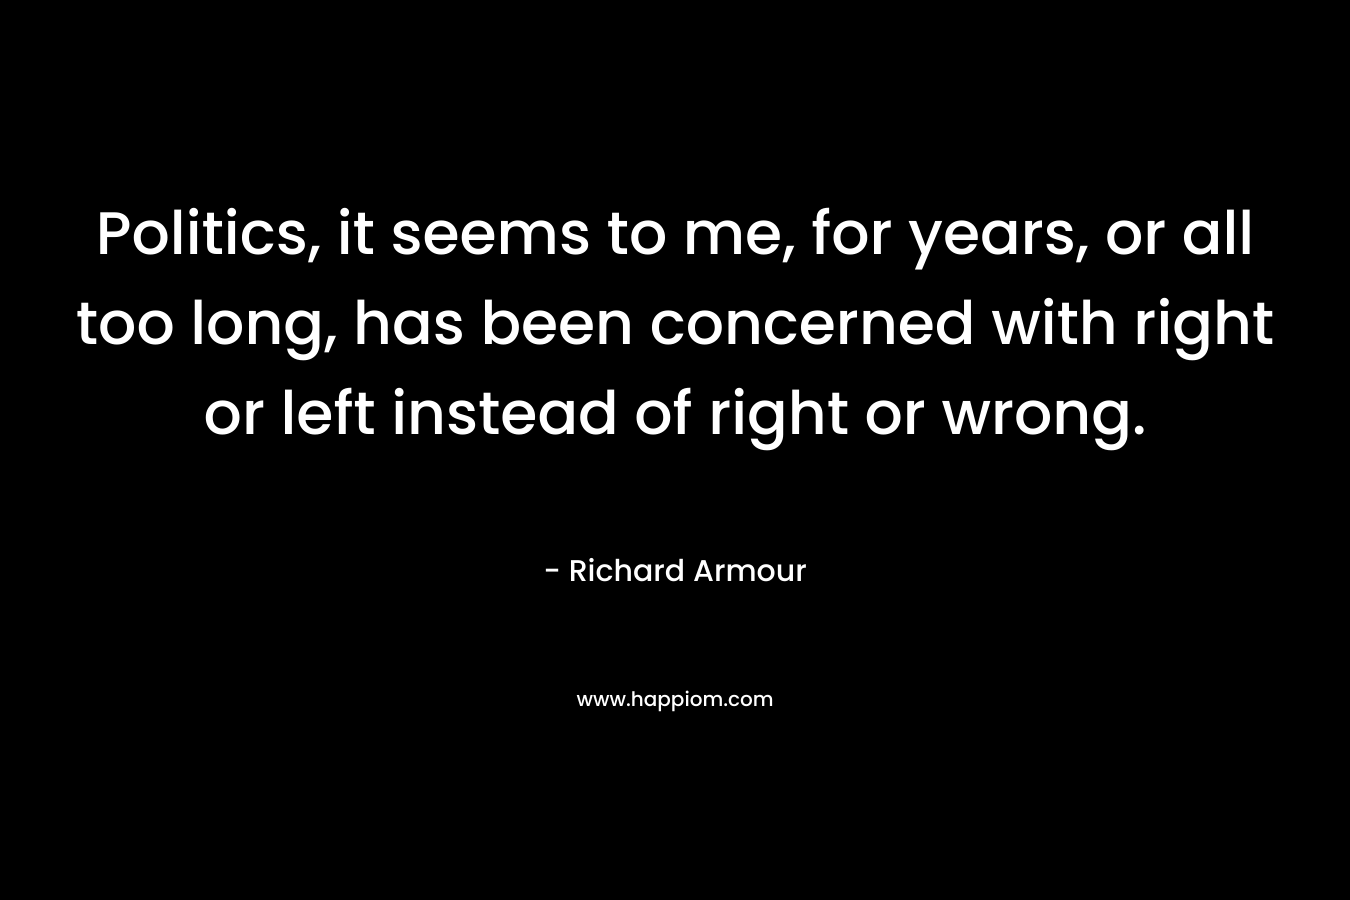 Politics, it seems to me, for years, or all too long, has been concerned with right or left instead of right or wrong.